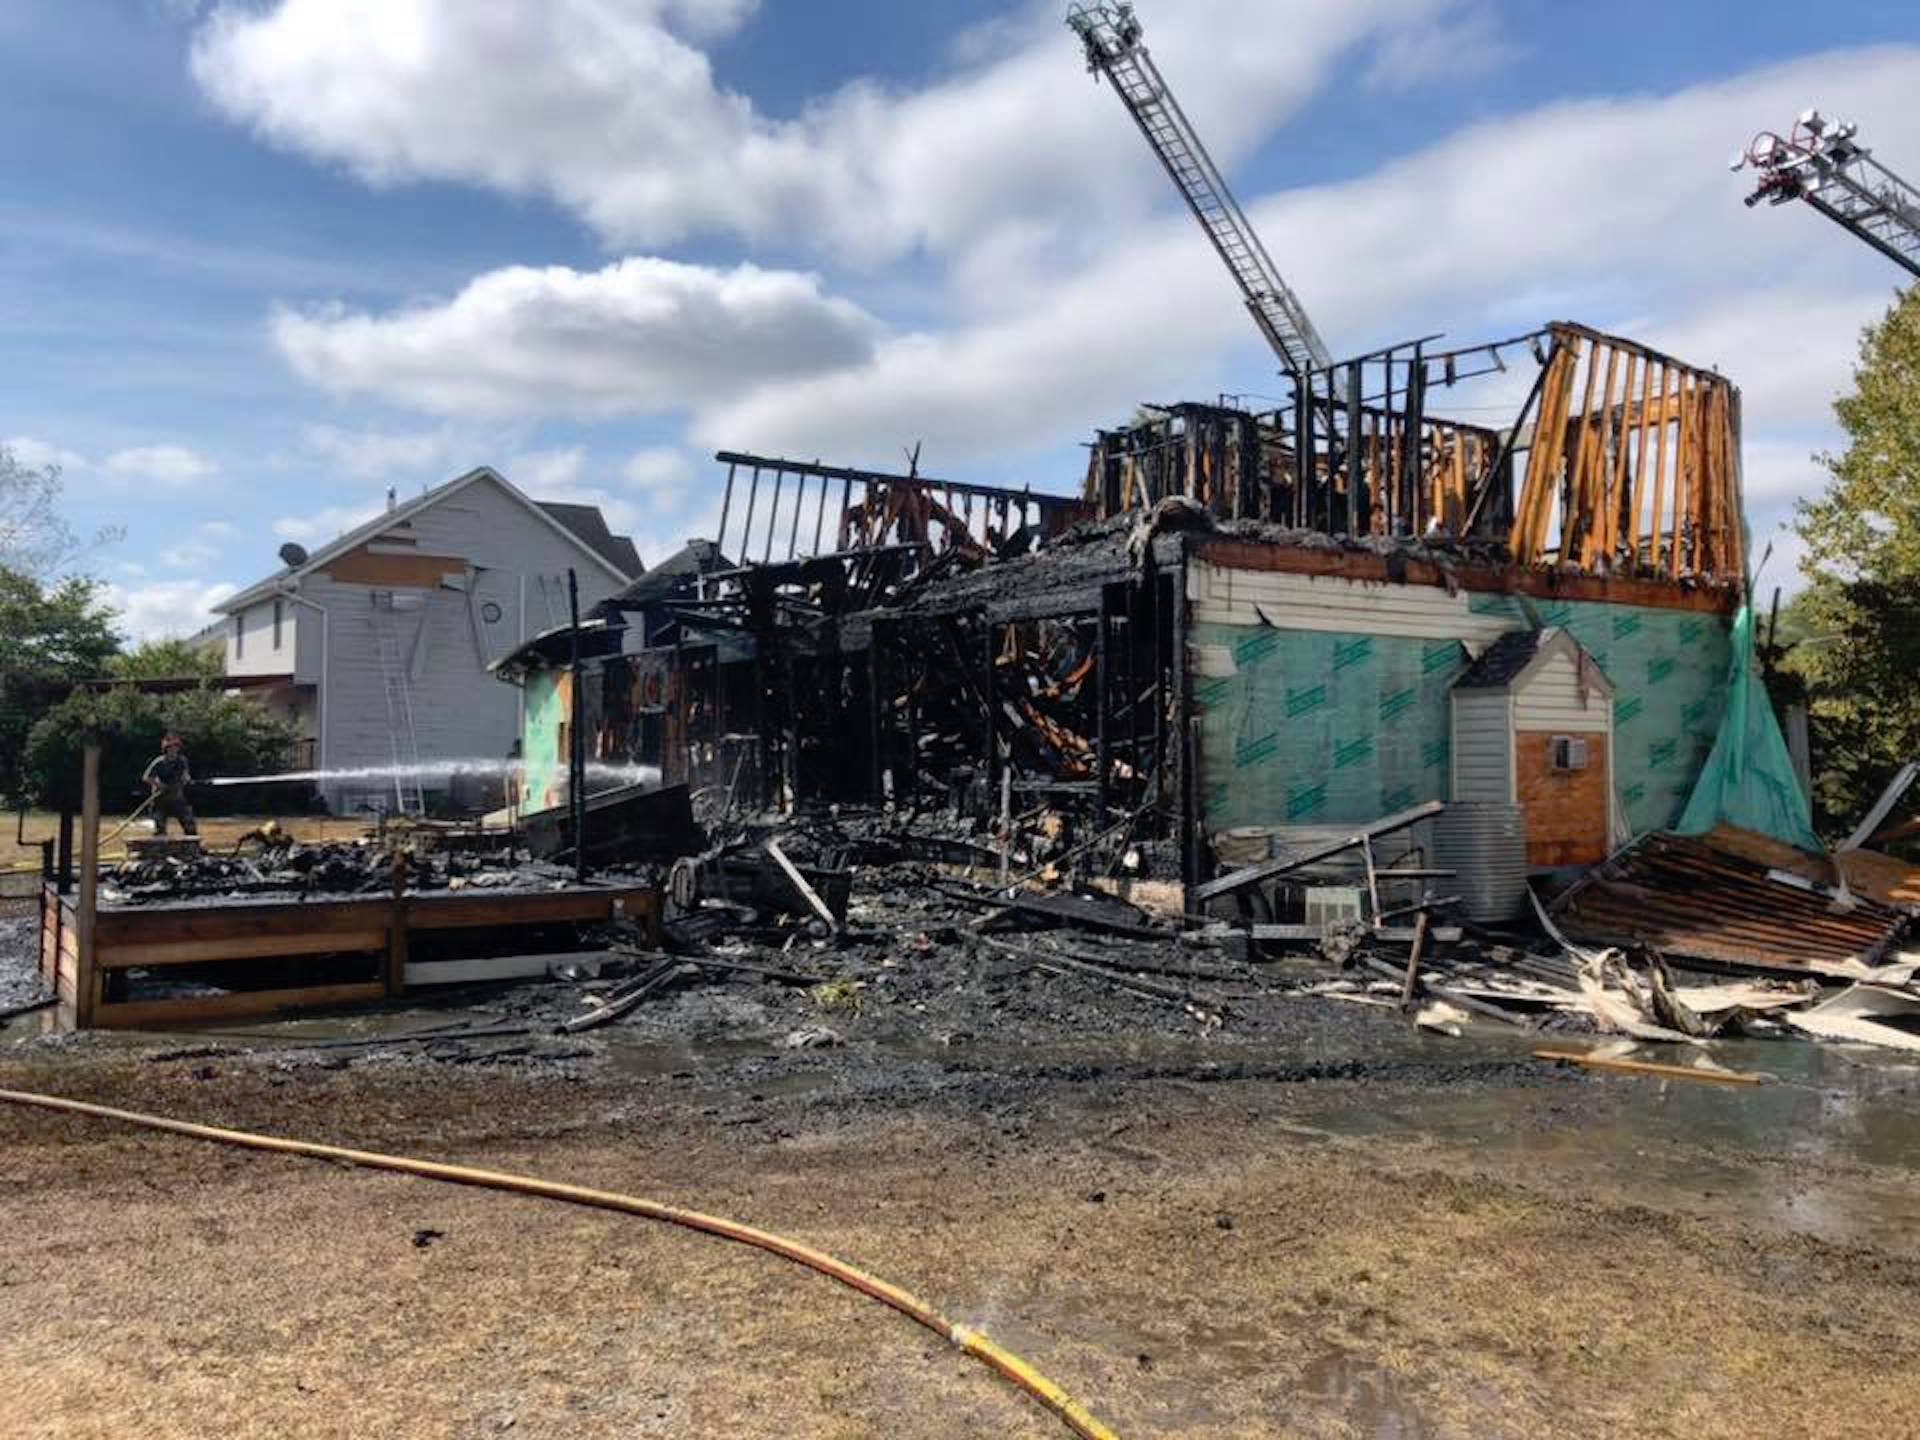 Dan and Heather Adamson's house in Hamilton Township was destroyed by fire in September. The reconstruction of their home has been held up by Gov. Tom Wolf's business closure order.